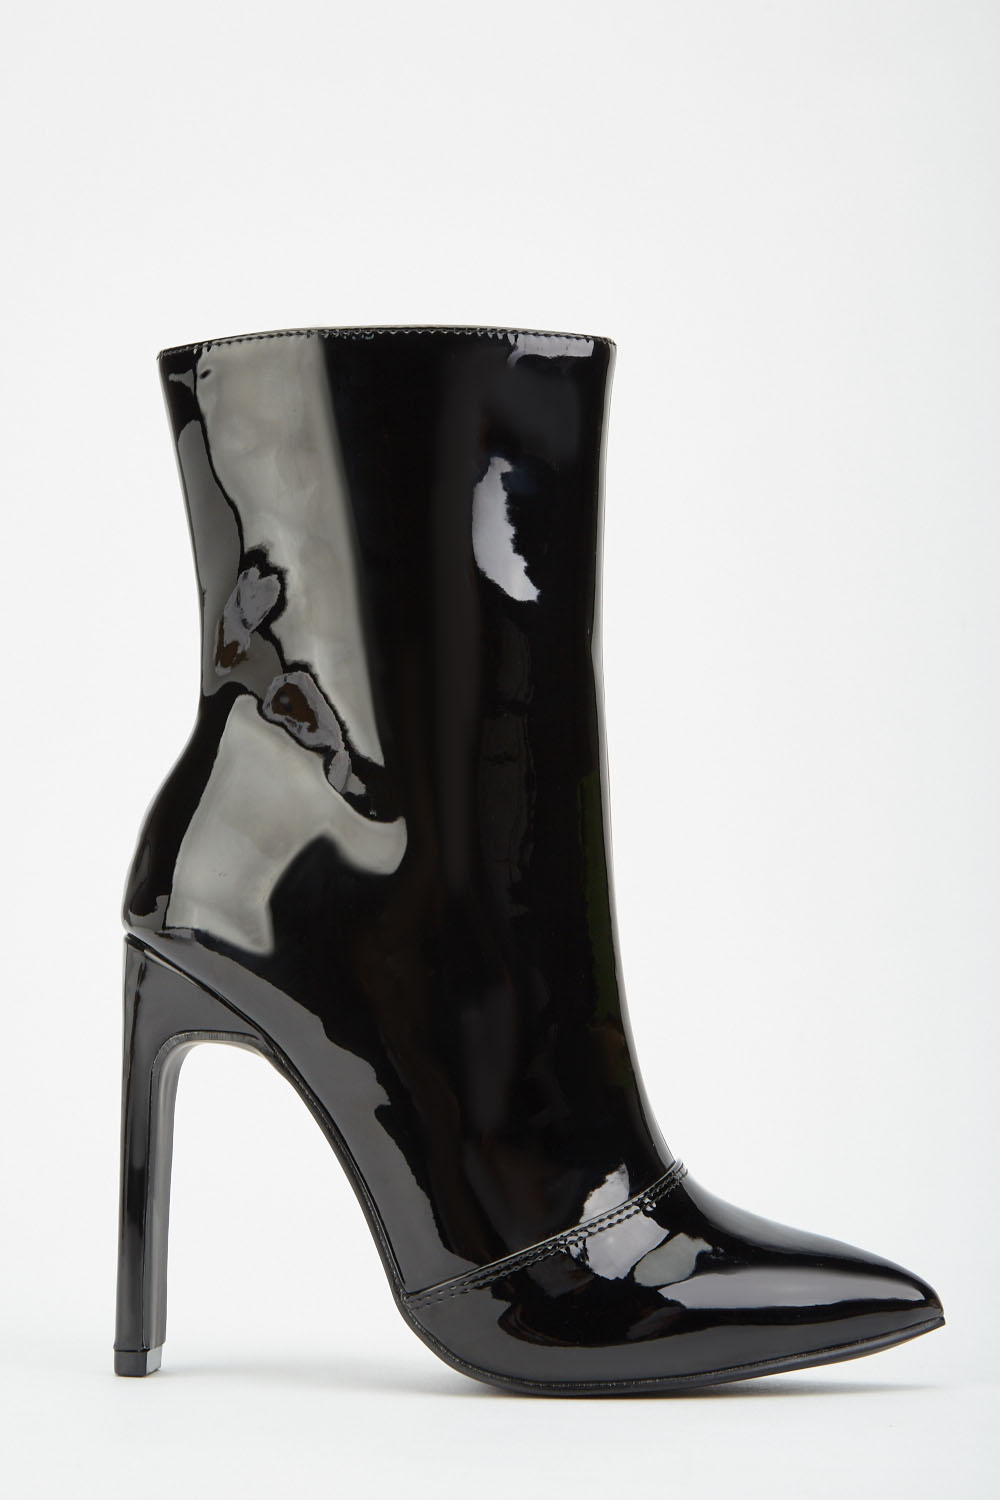 LOST INK Janine Patent Gem Trim Ankle Boots - Just $7